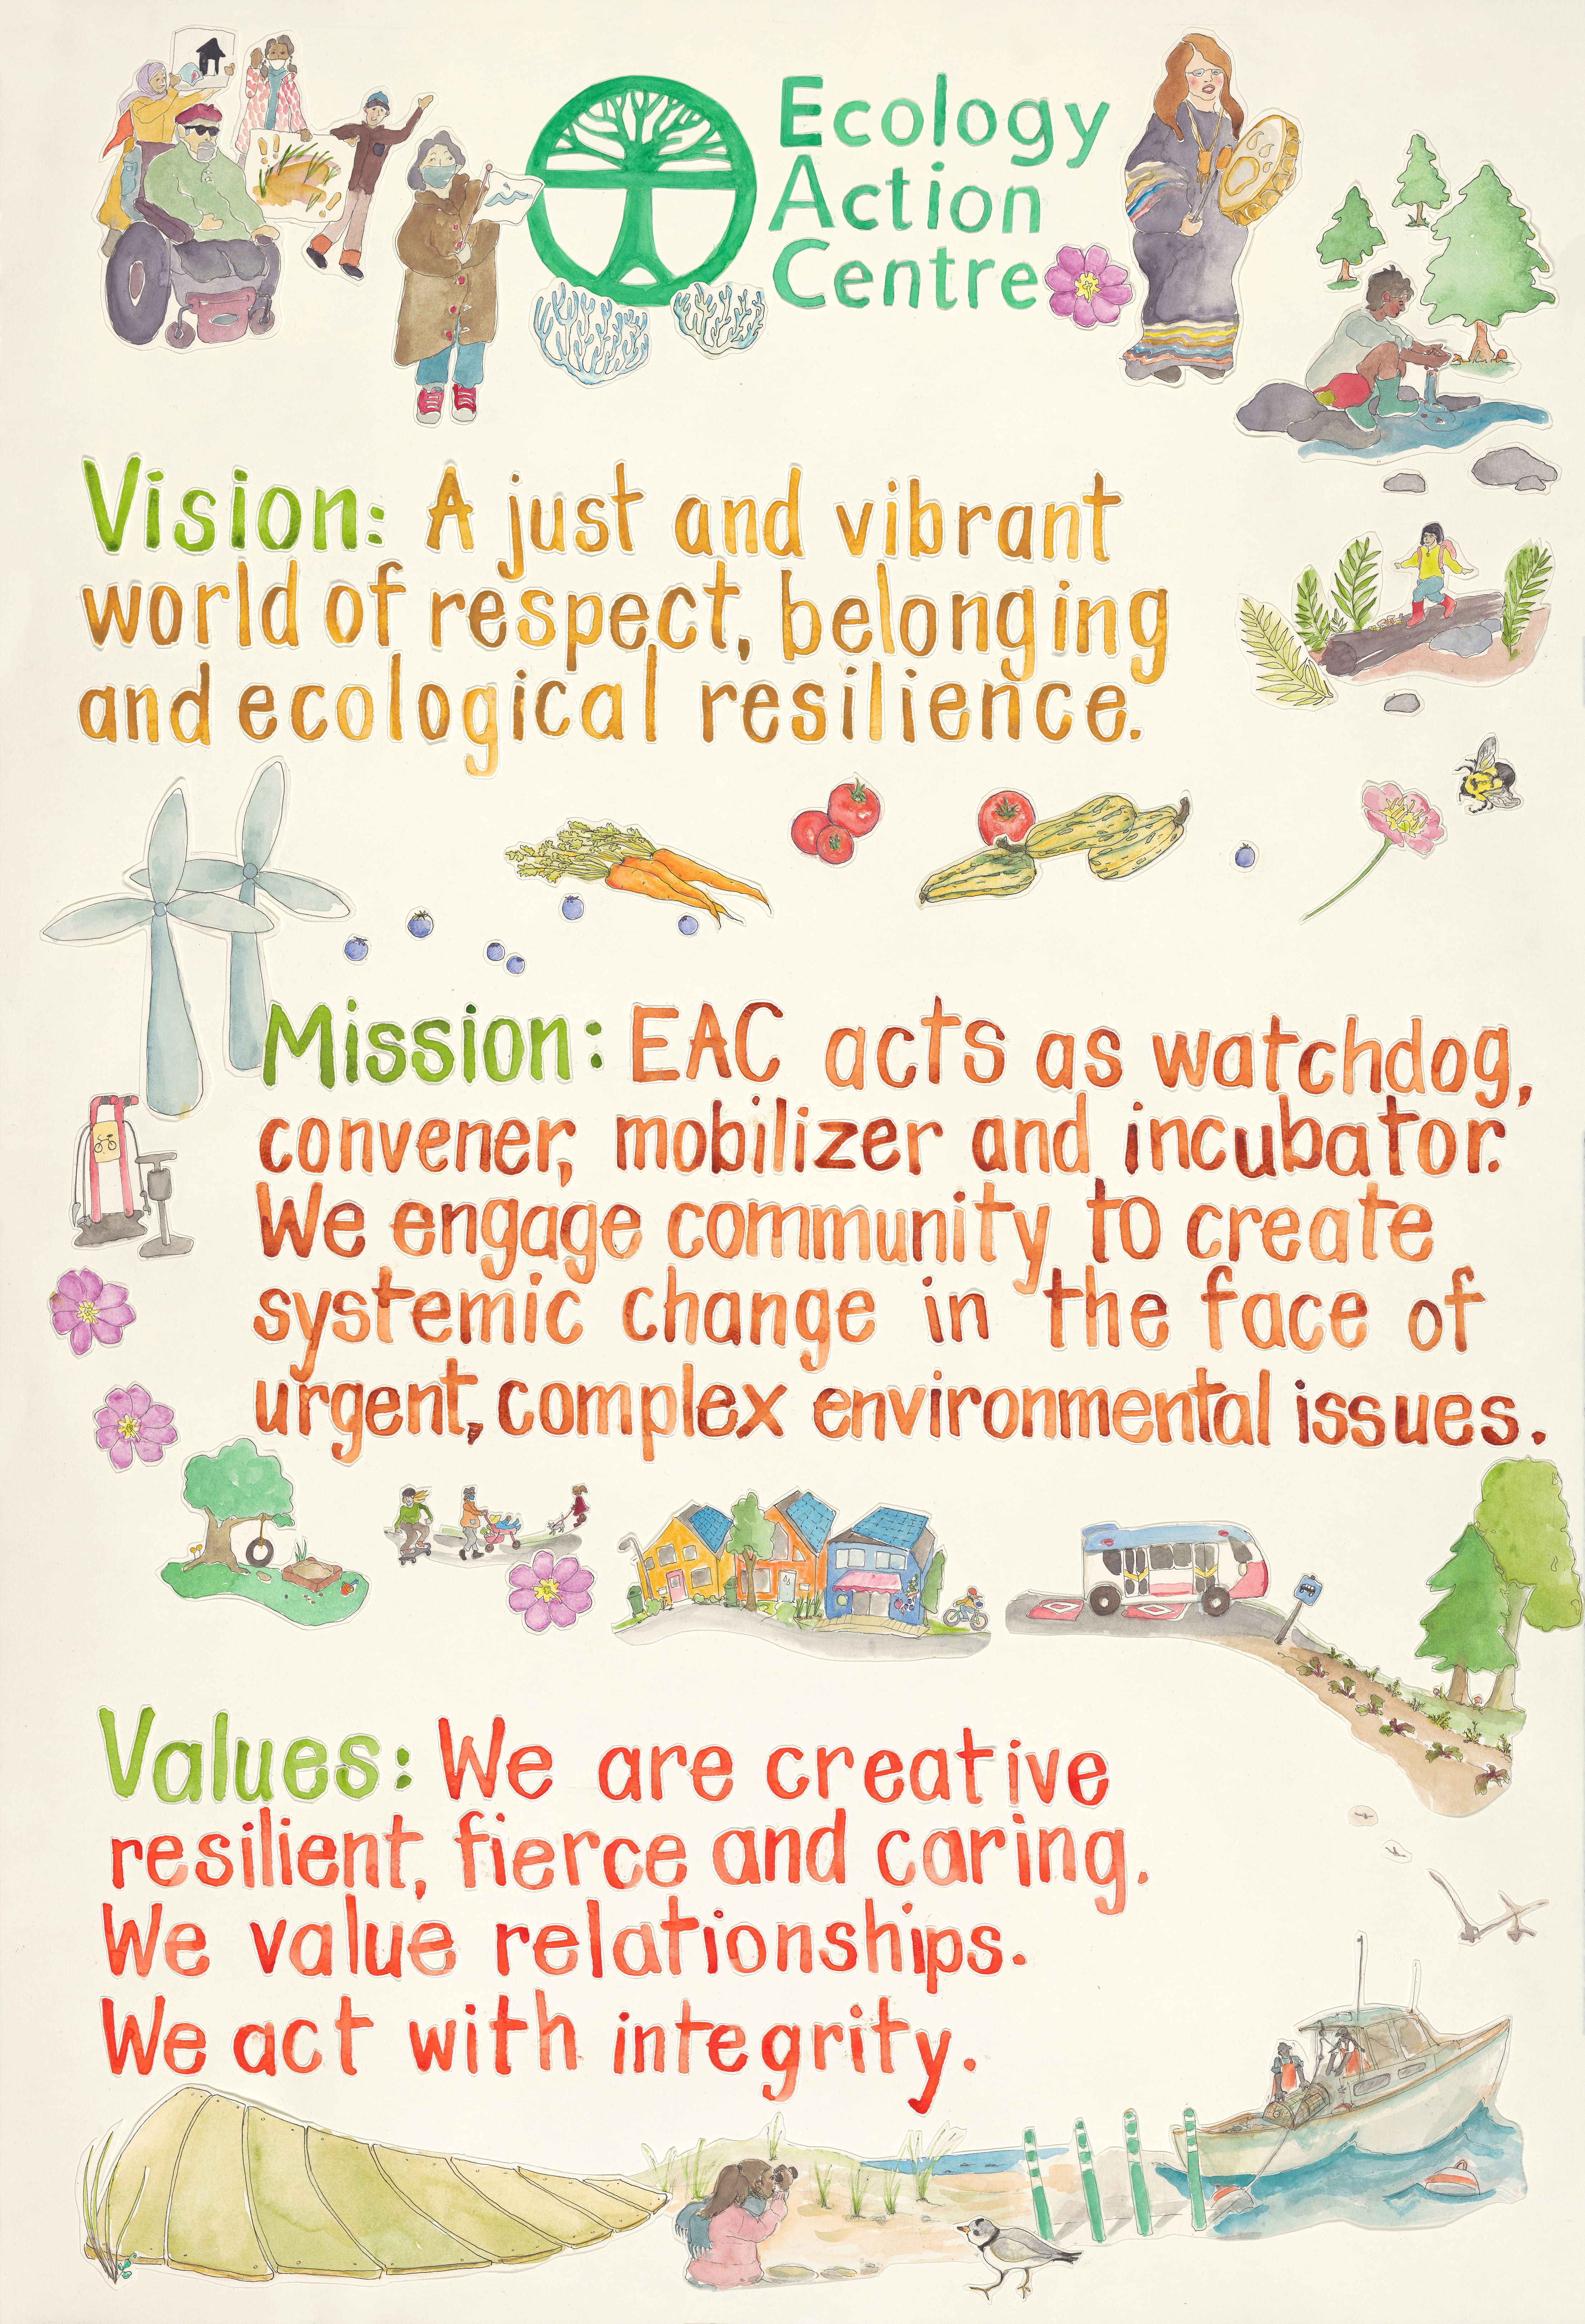 EAC's mission, vision, and values written in watercolours with small drawings and paintings of EAC-related images surrounding them